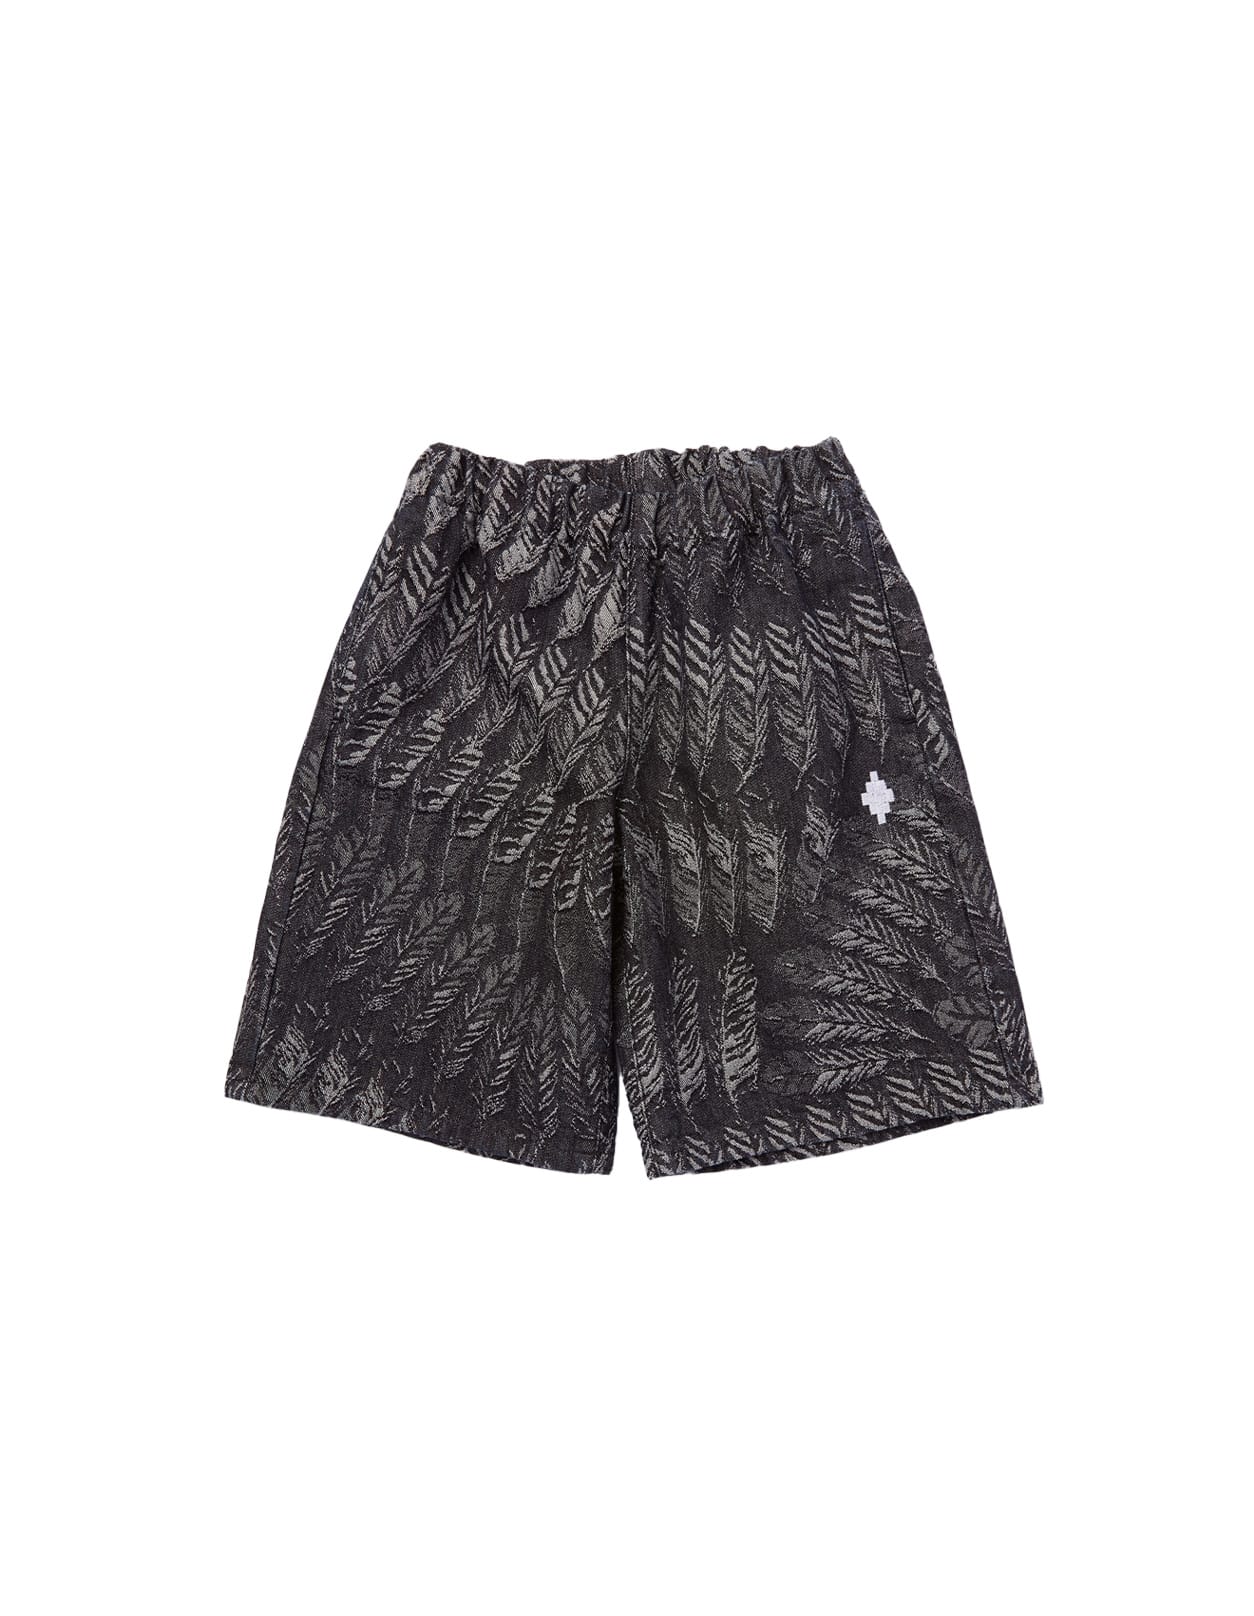 MARCELO BURLON COUNTY OF MILAN BLACK DENIM SHORTS WITH ALL-OVER FEATHERS